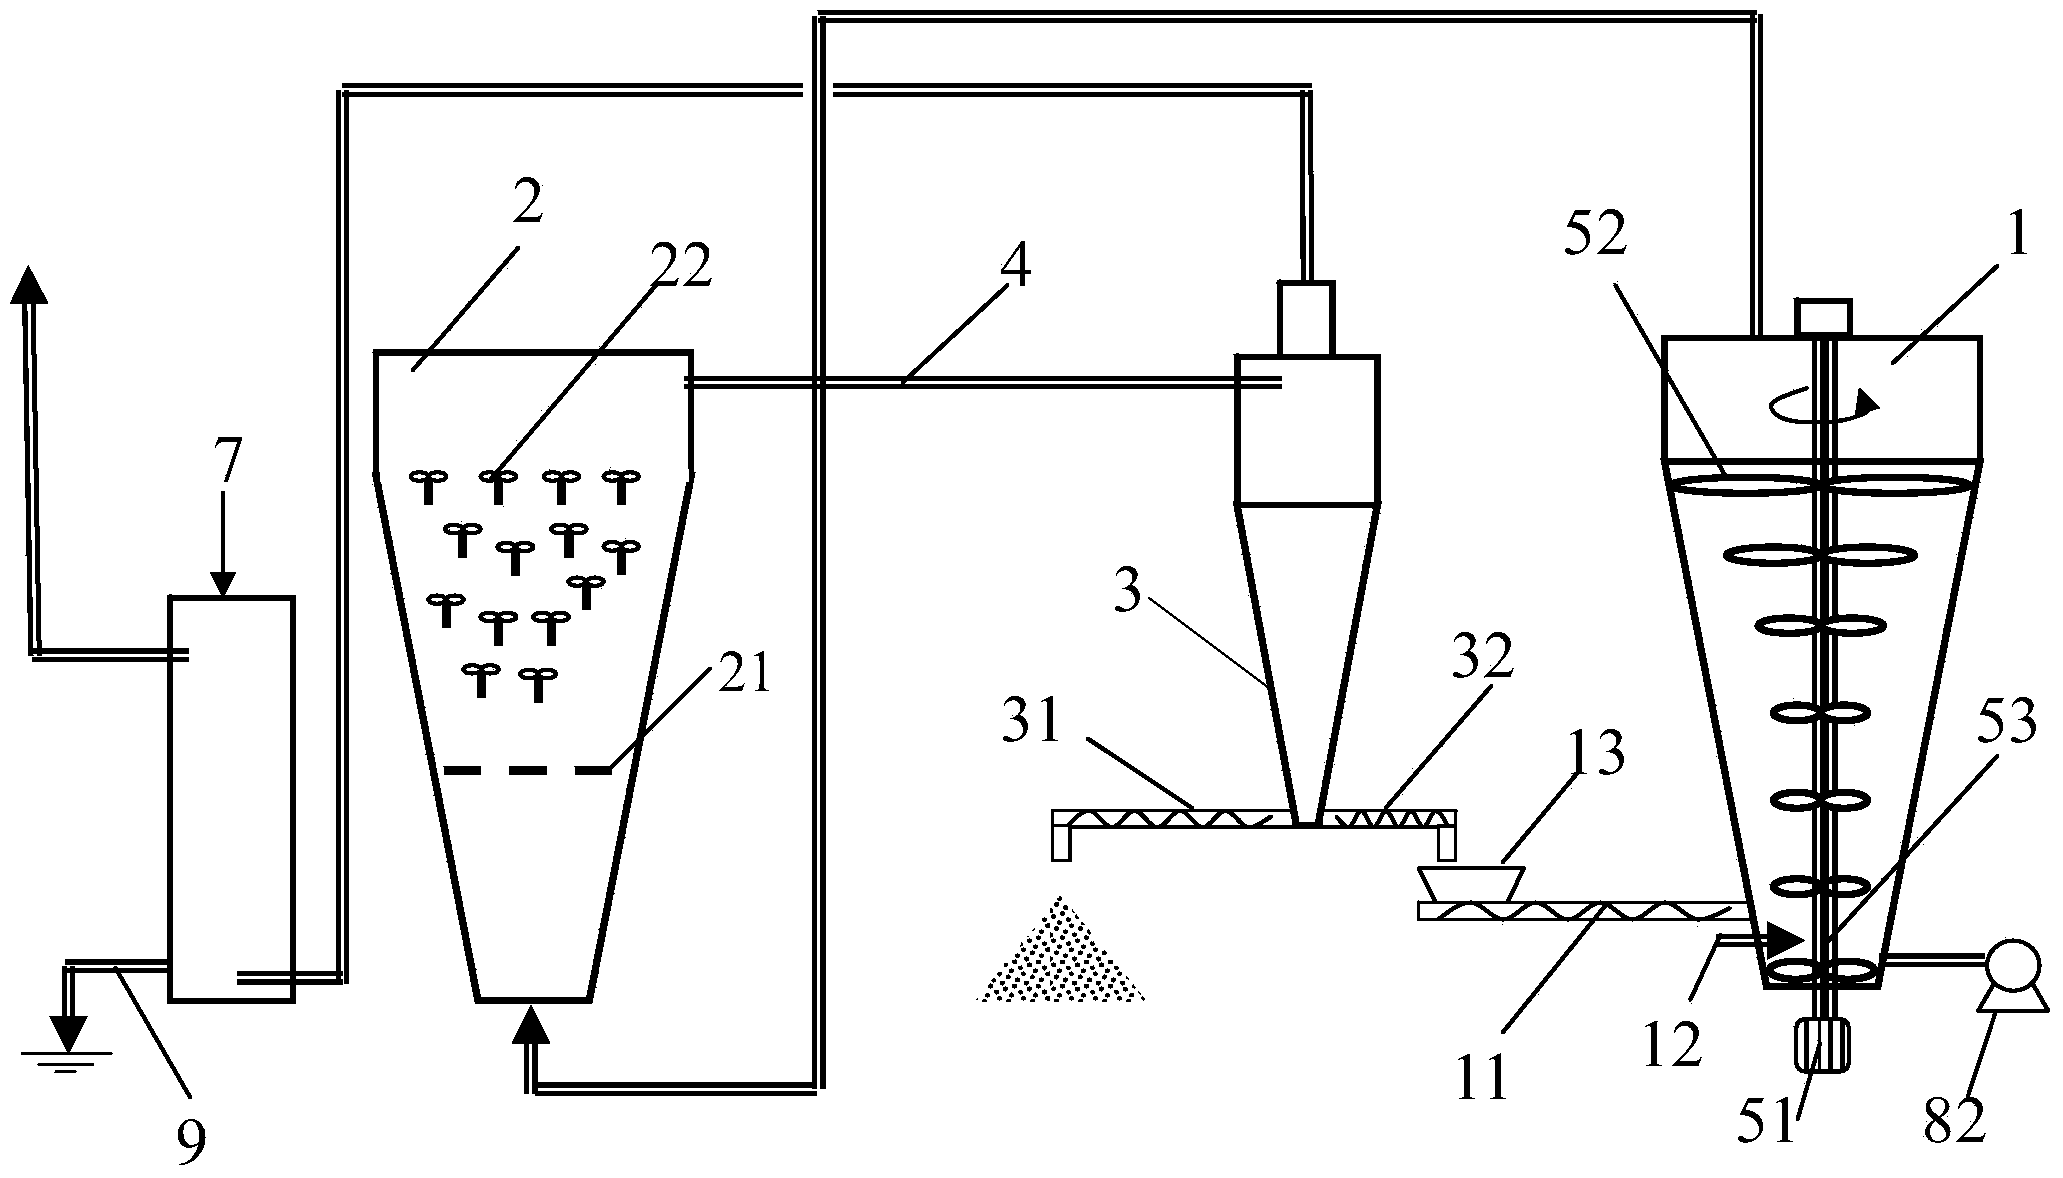 Circulating fluid bed air-drying system